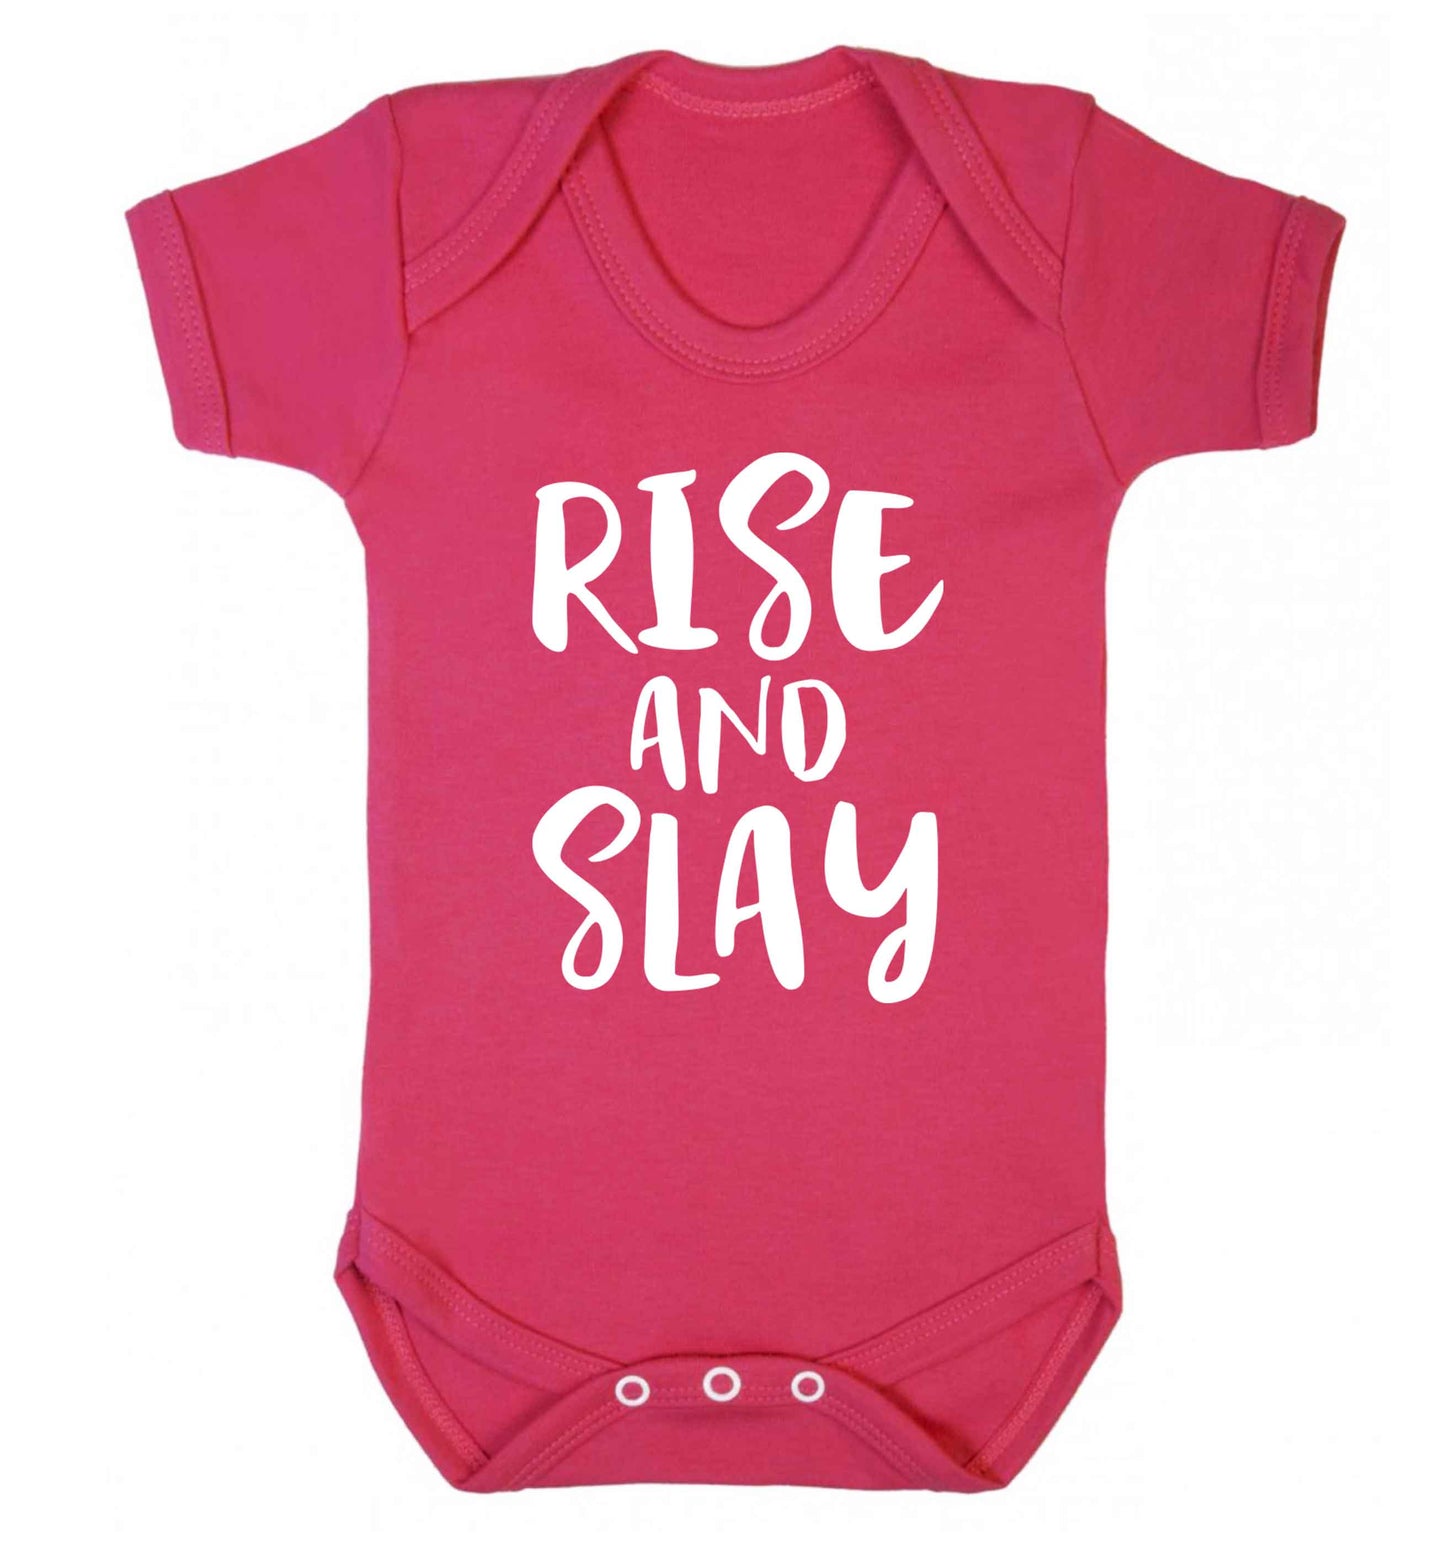 Rise and slay Baby Vest dark pink 18-24 months